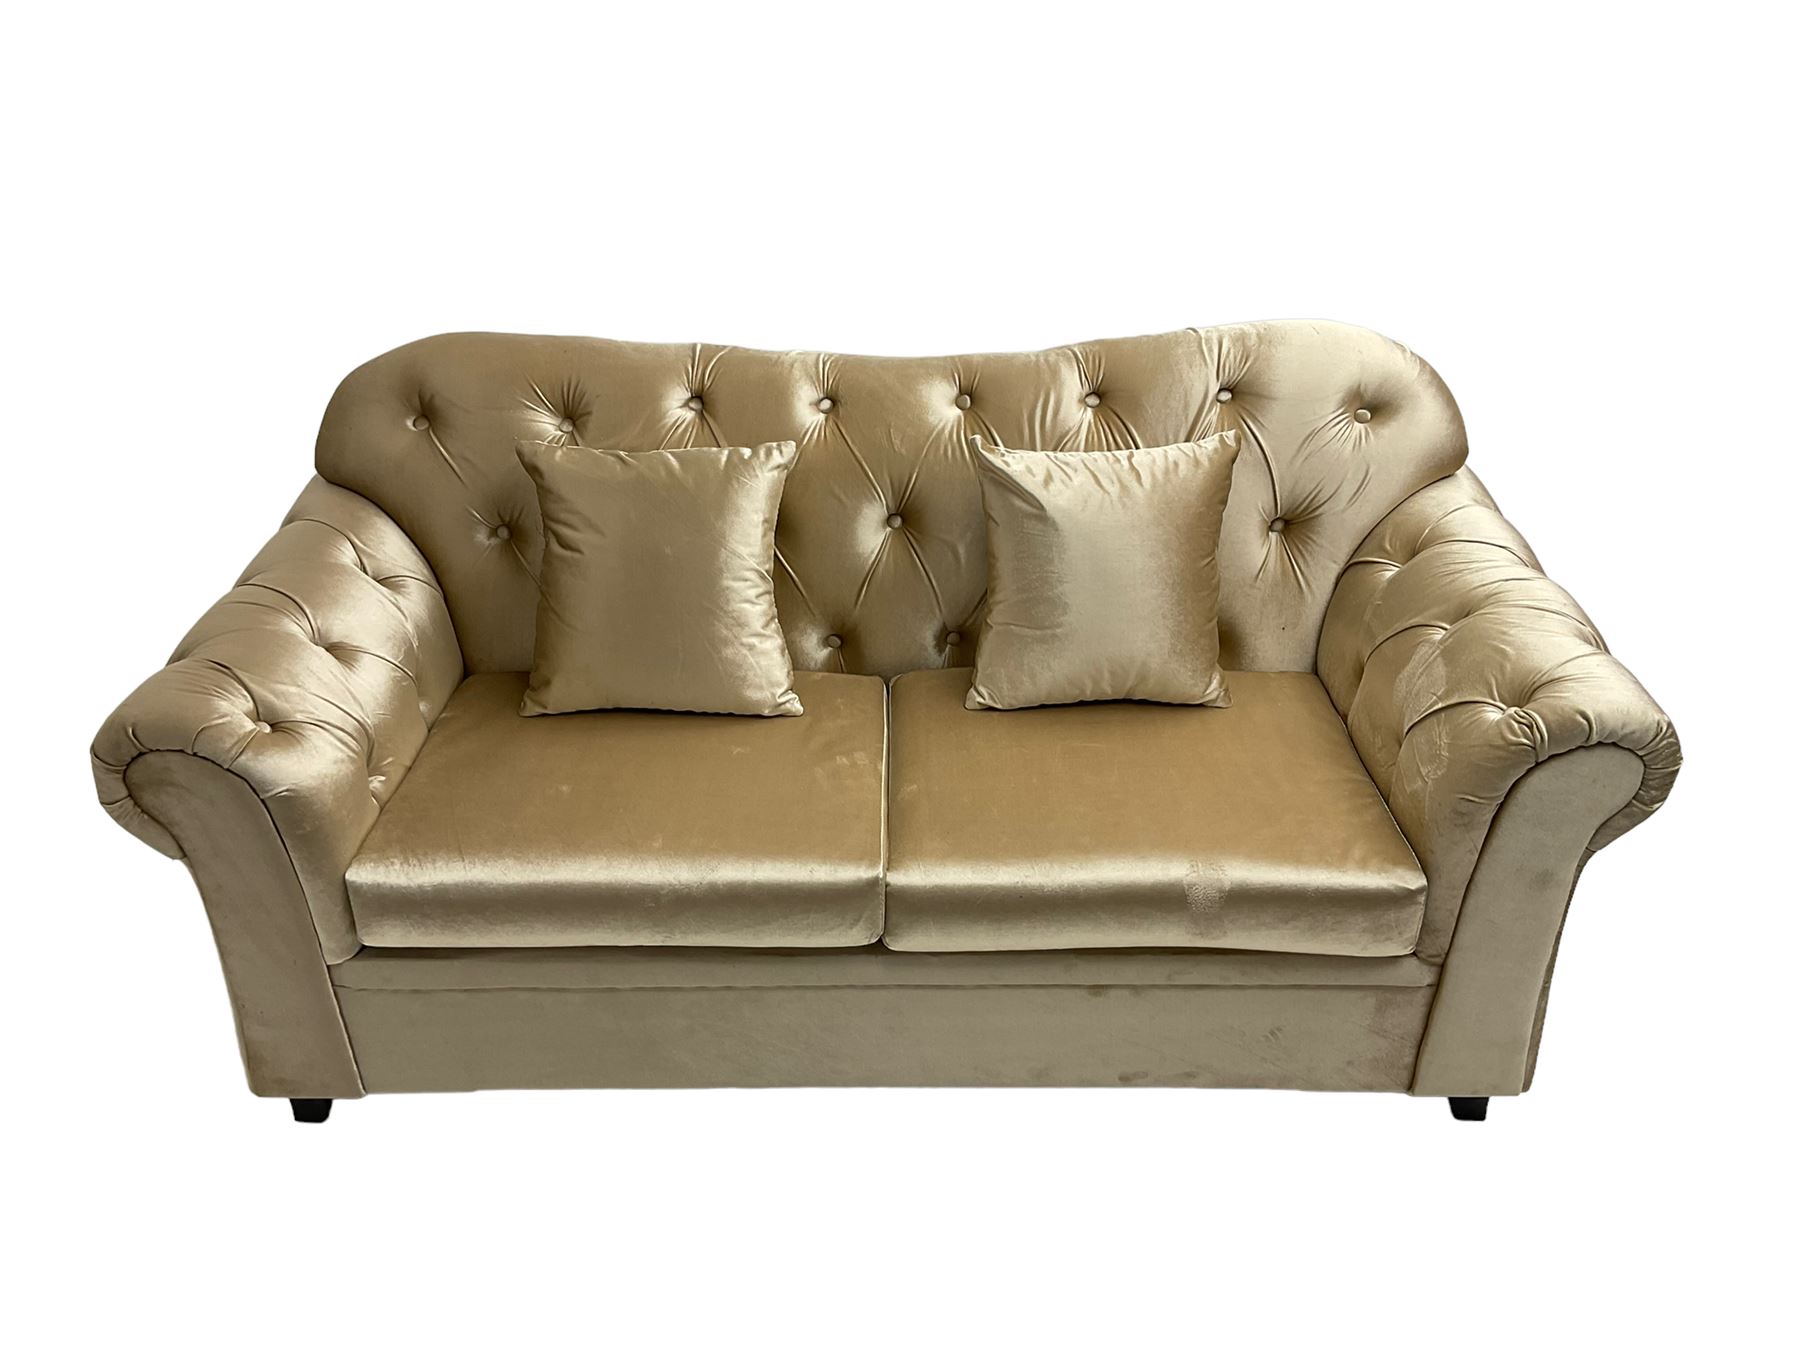 Chesterfield shaped two seat sofa - Image 2 of 6